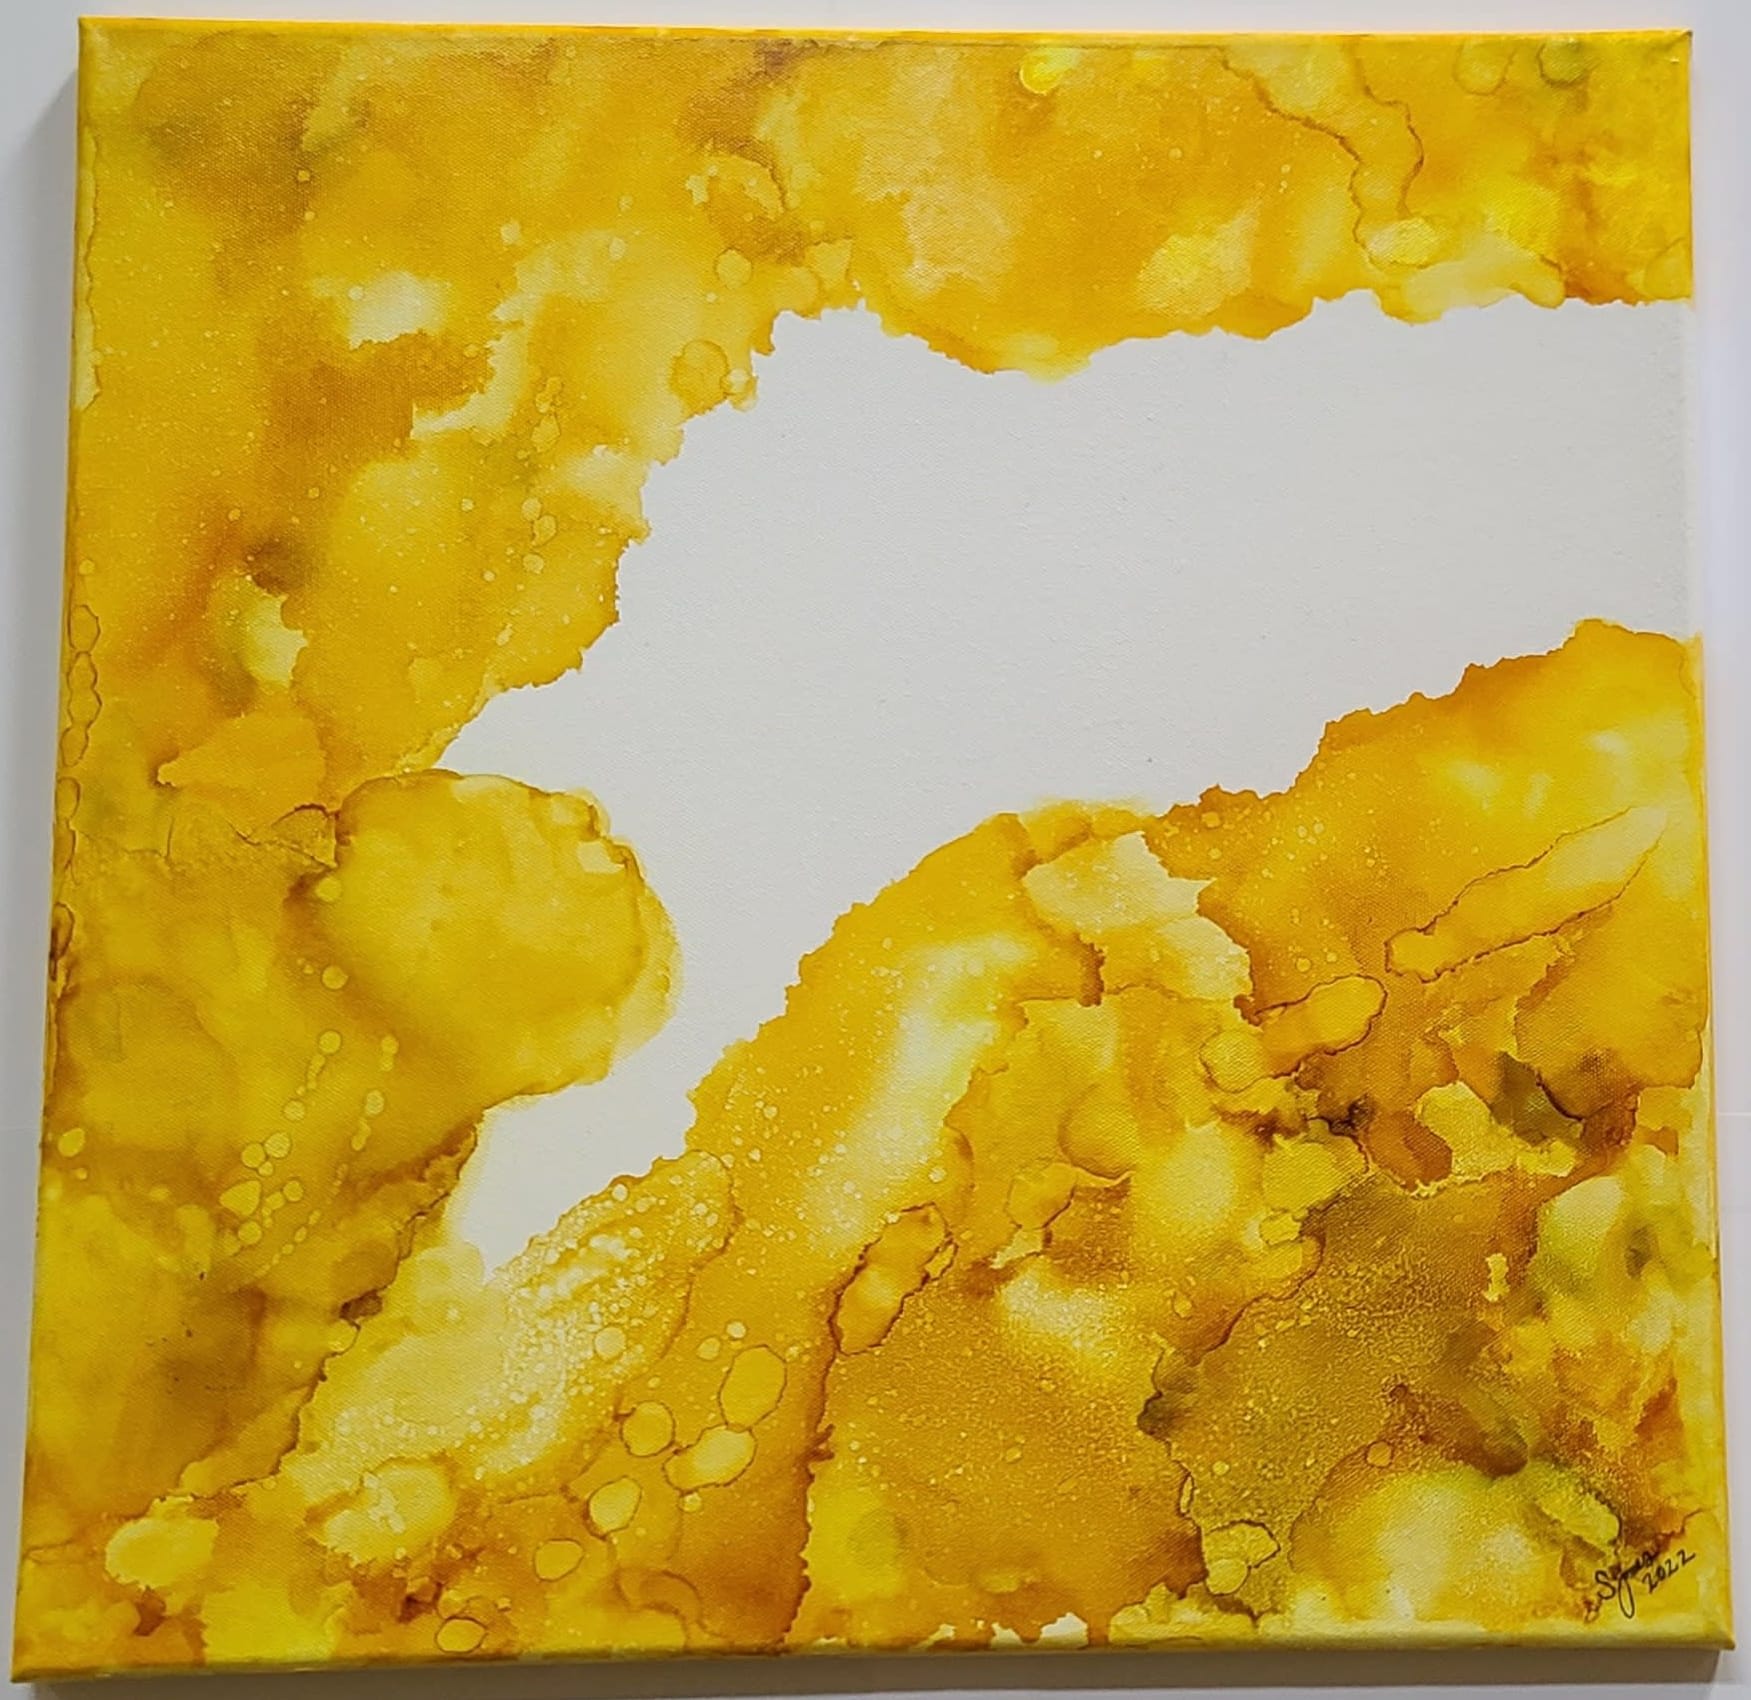 Alcohol Ink Painting on Canvas: Golden Yellow, Snapdragon Pink & Cobalt